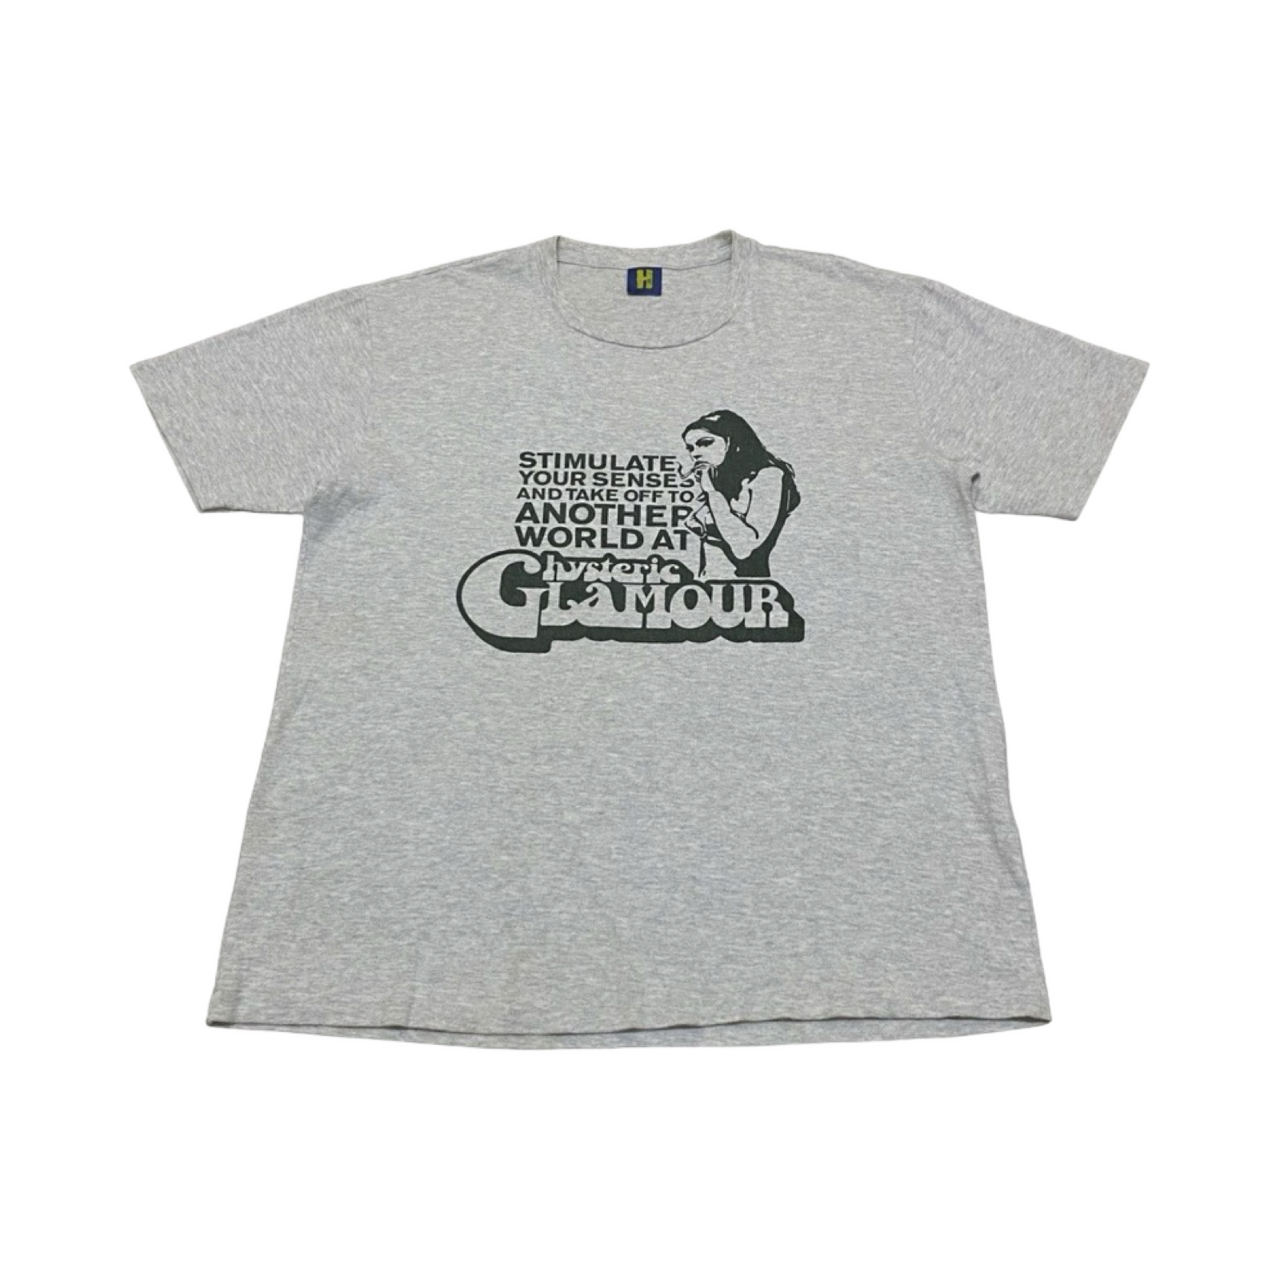 Hysteric Glamour Vintage T Shirt